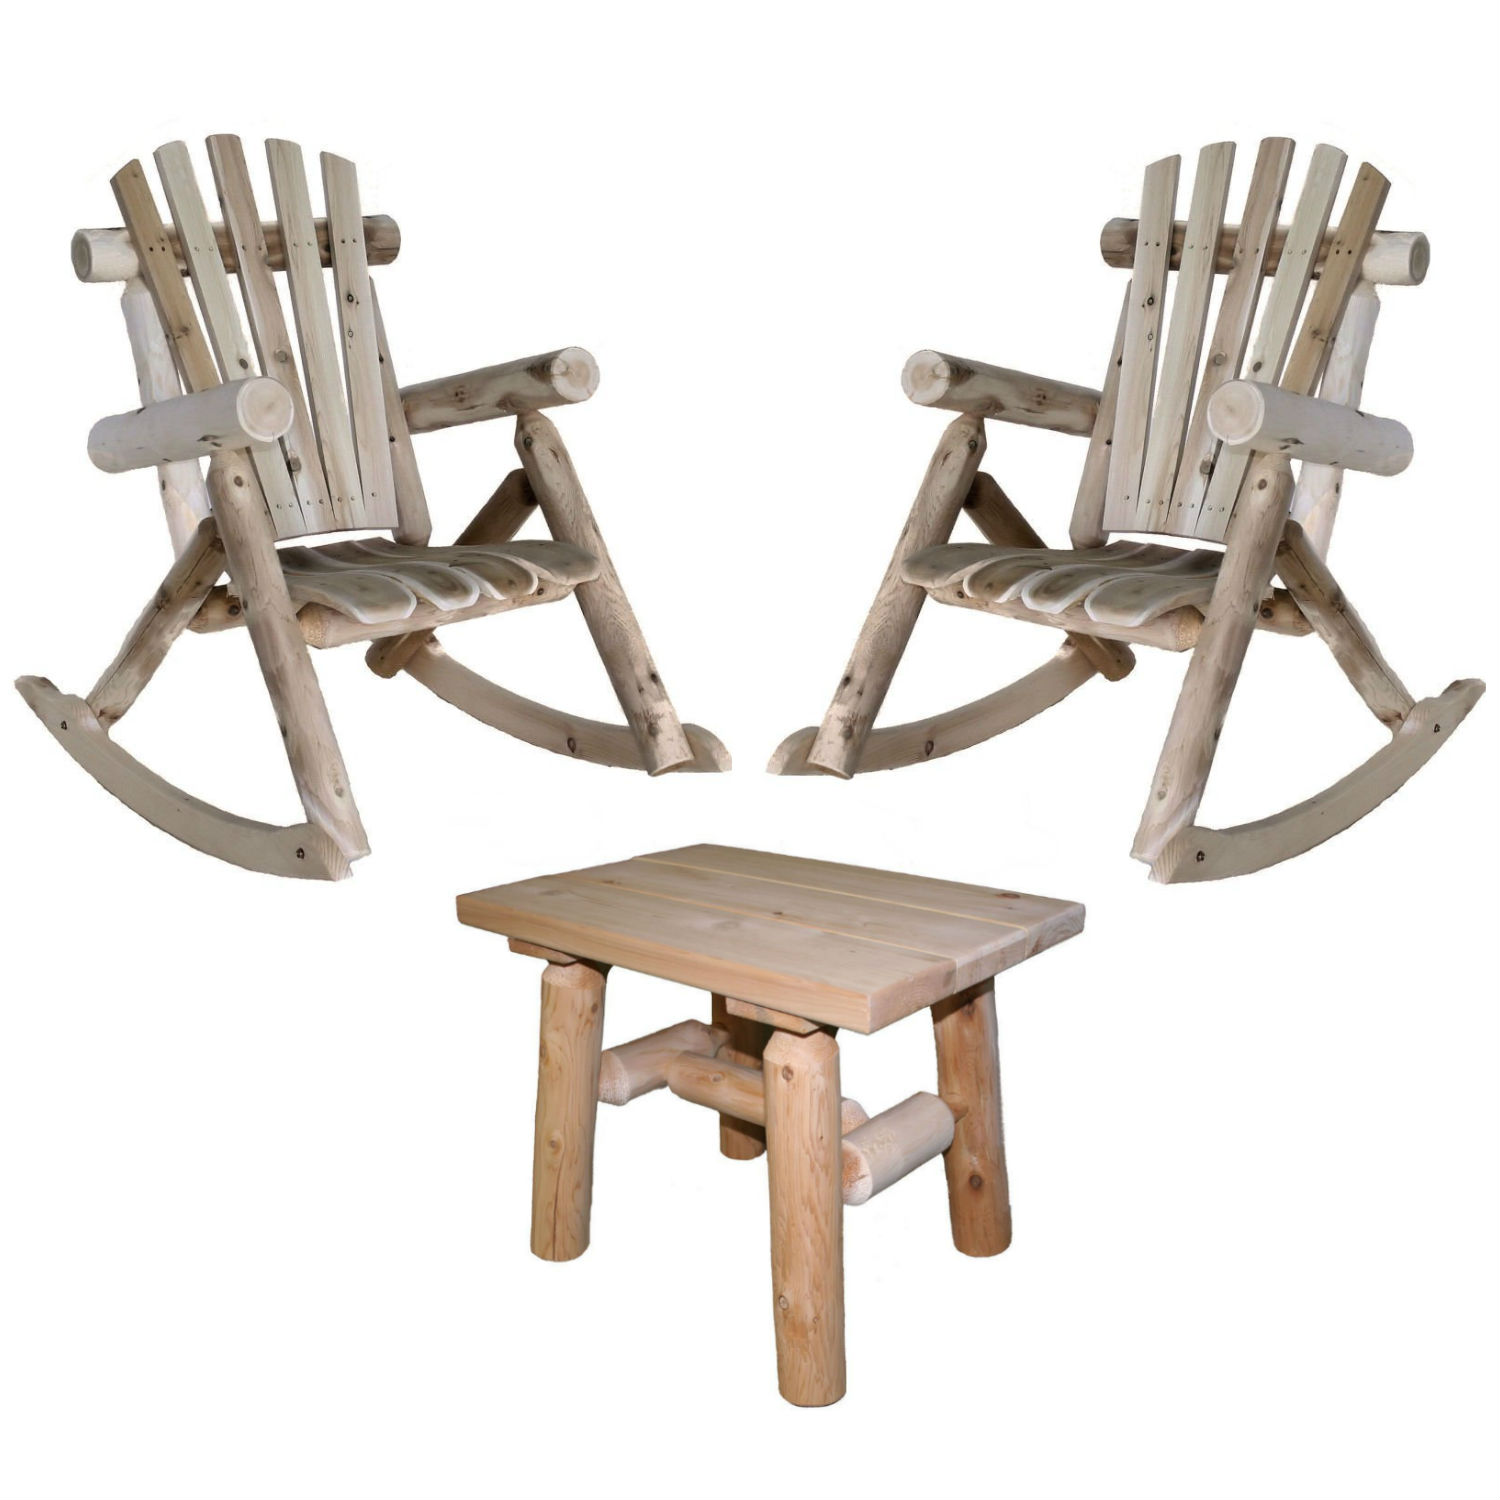 Lakeland Mills Patio Rocking Chair (Set of 2) with End Table - image 1 of 3